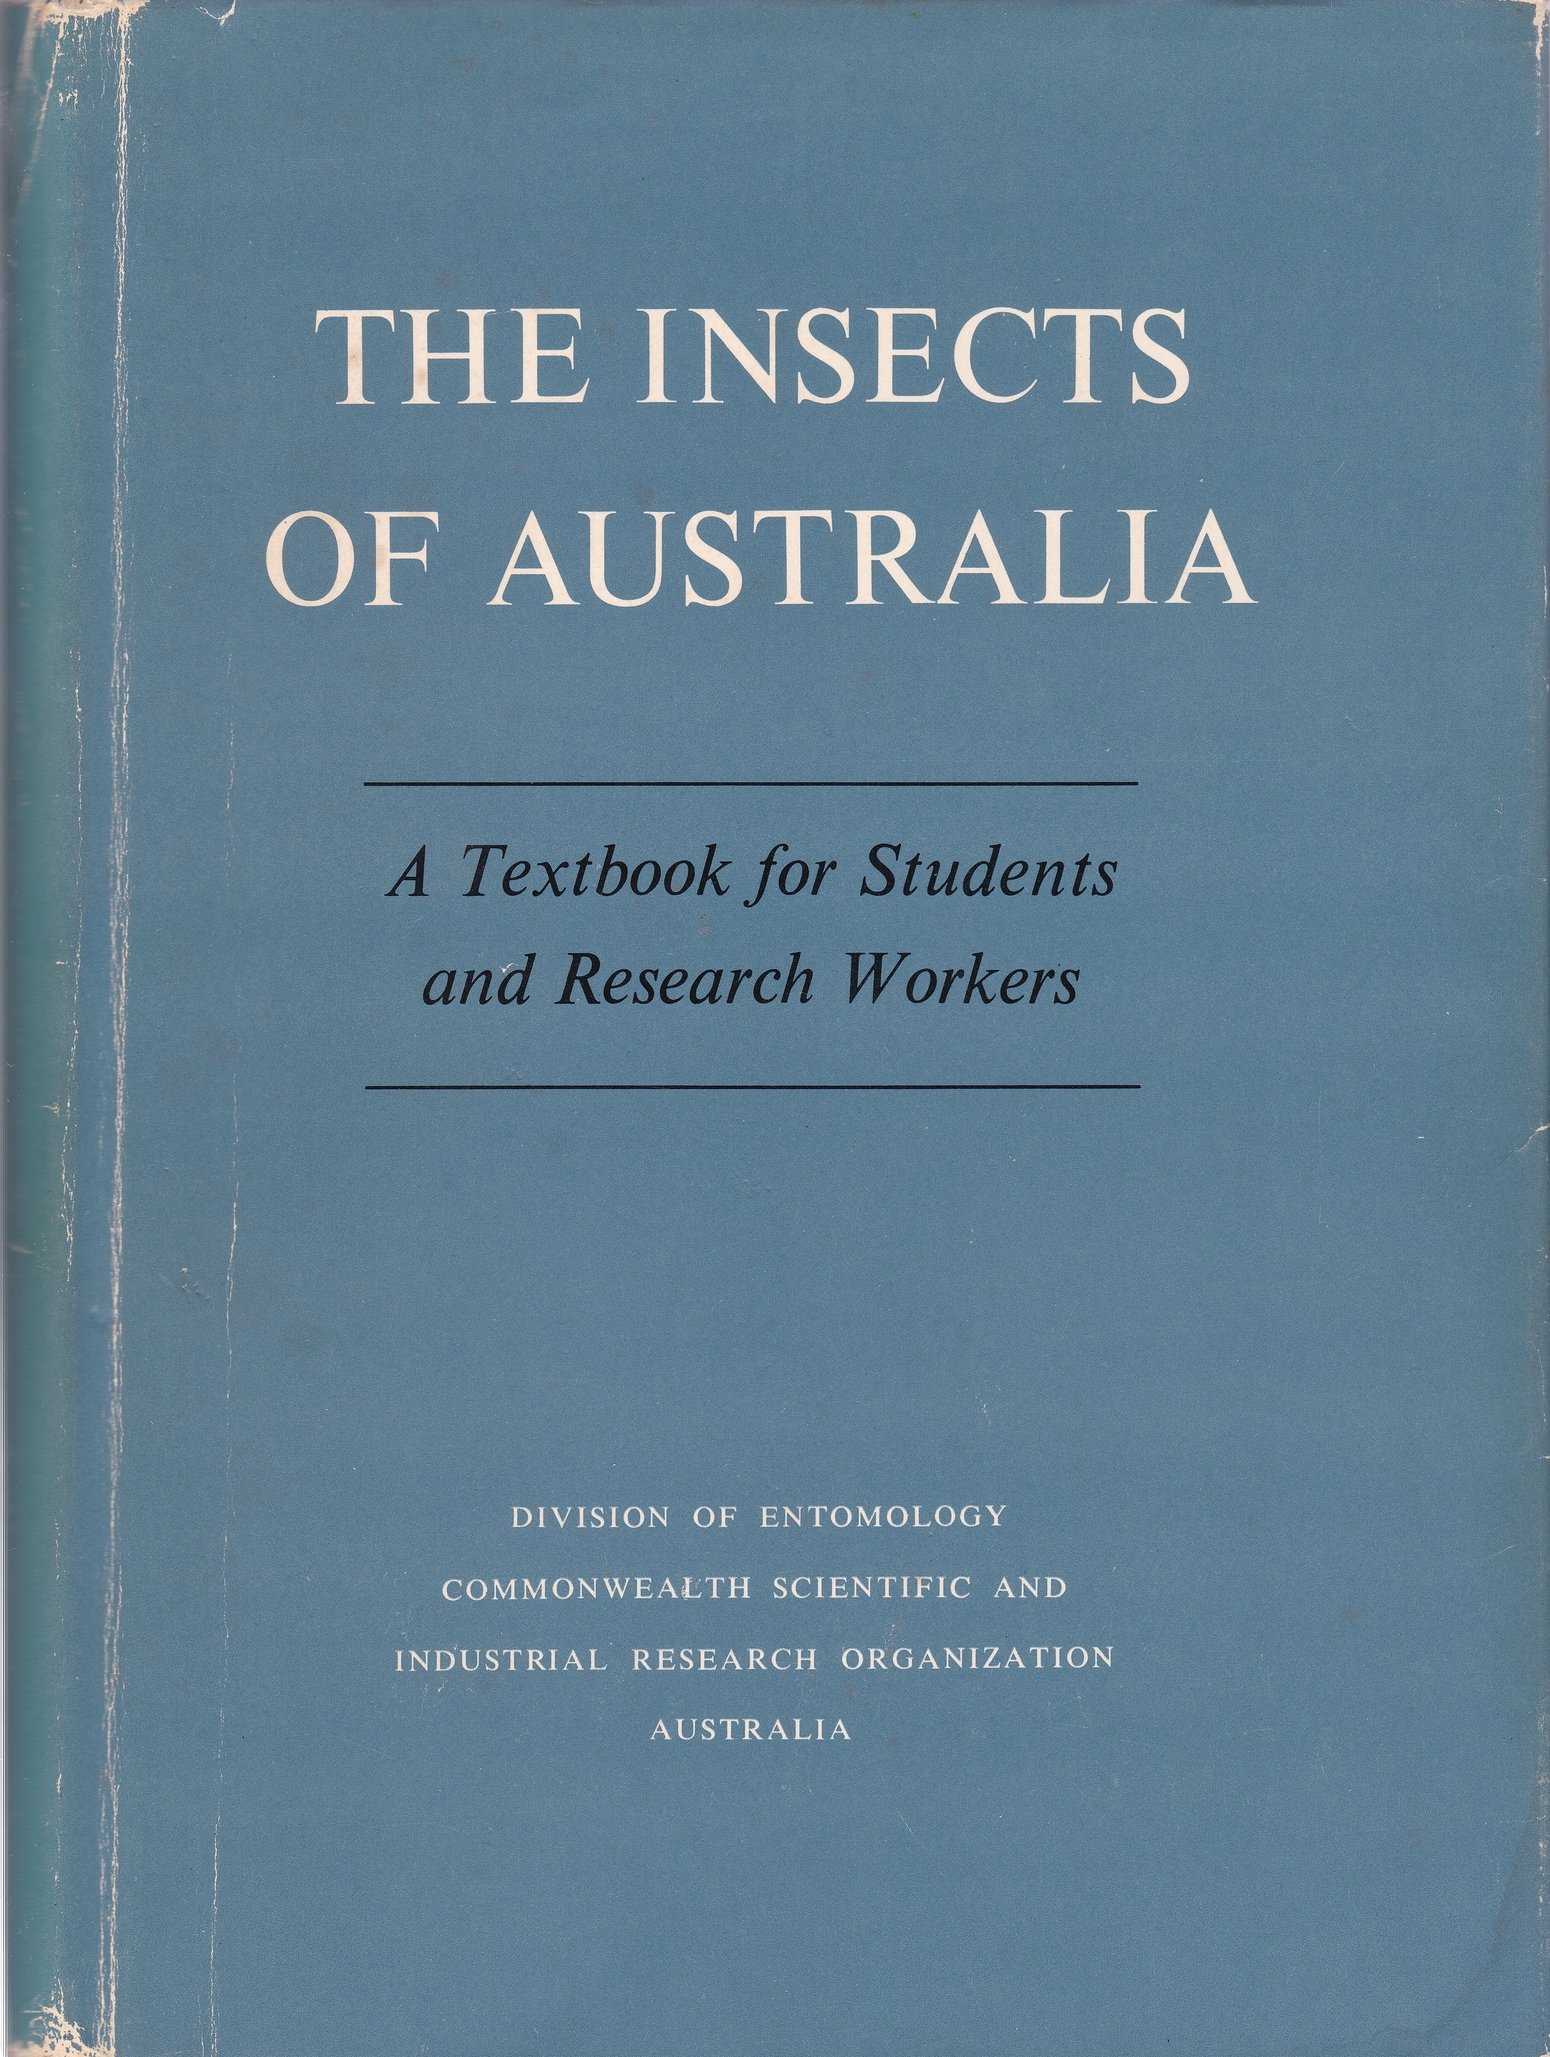 The Insects of Australia (Rippl-Rónai Múzeum CC BY-NC-ND)